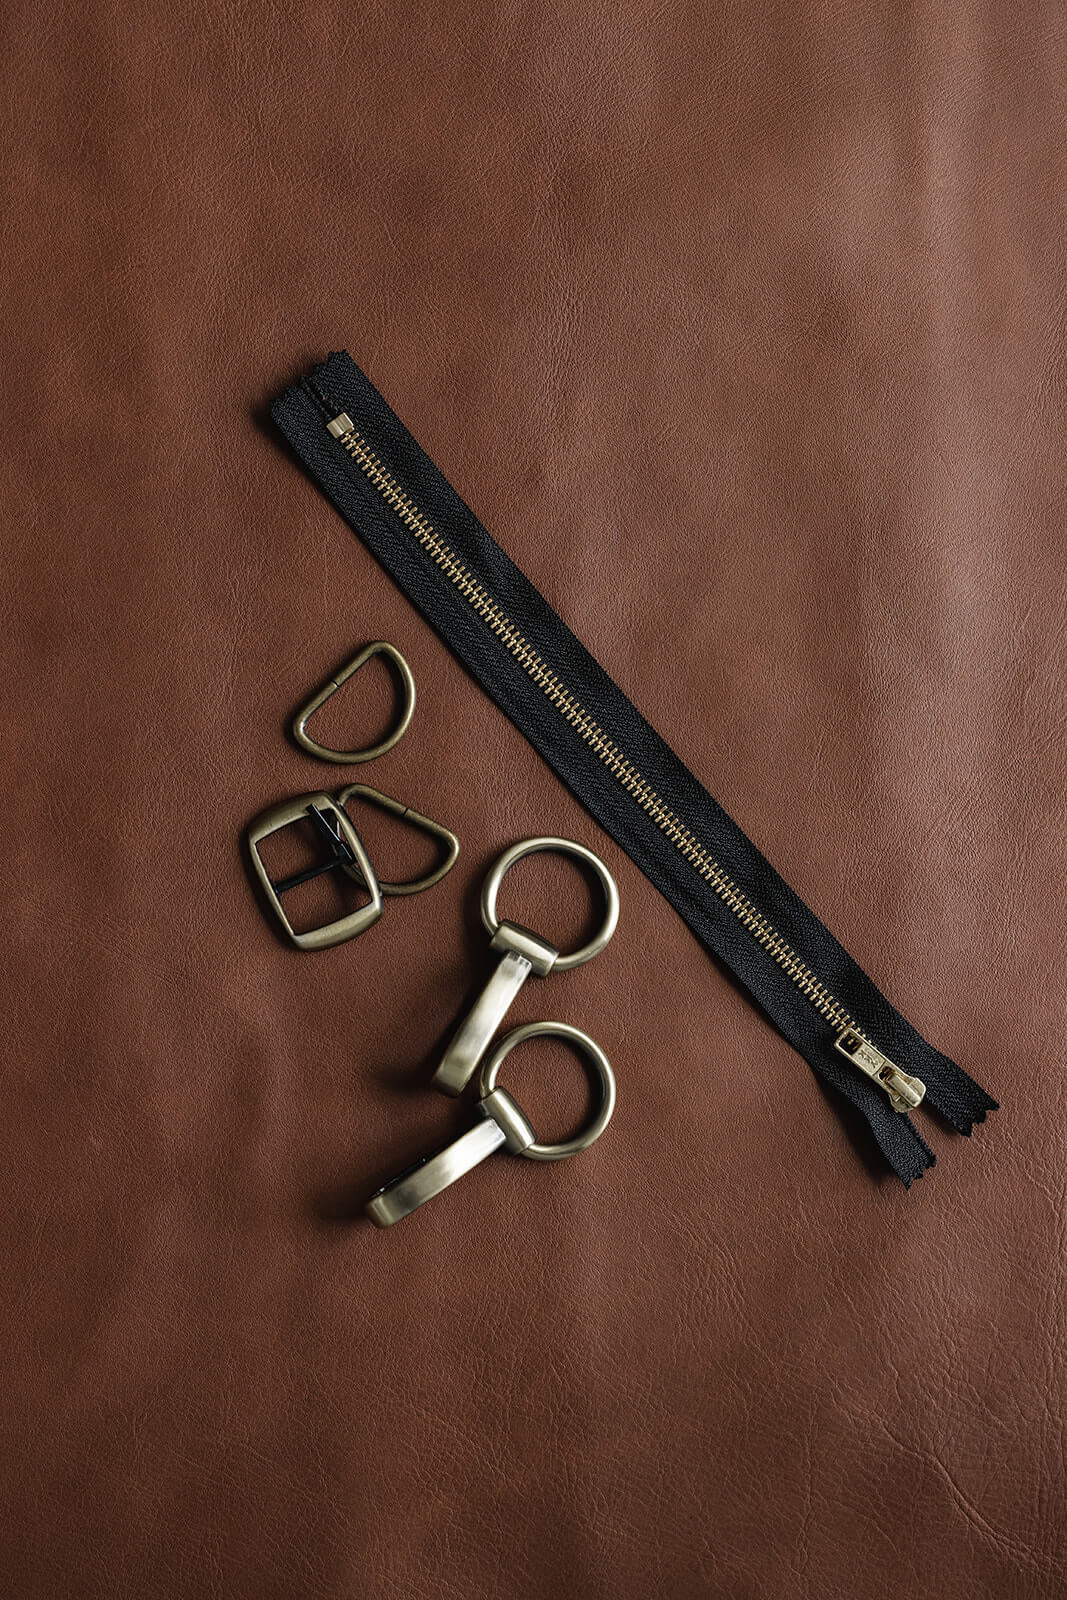 Hands on tan leather showing black and gold ykk zip and antique hardware for Ella Jackson brand